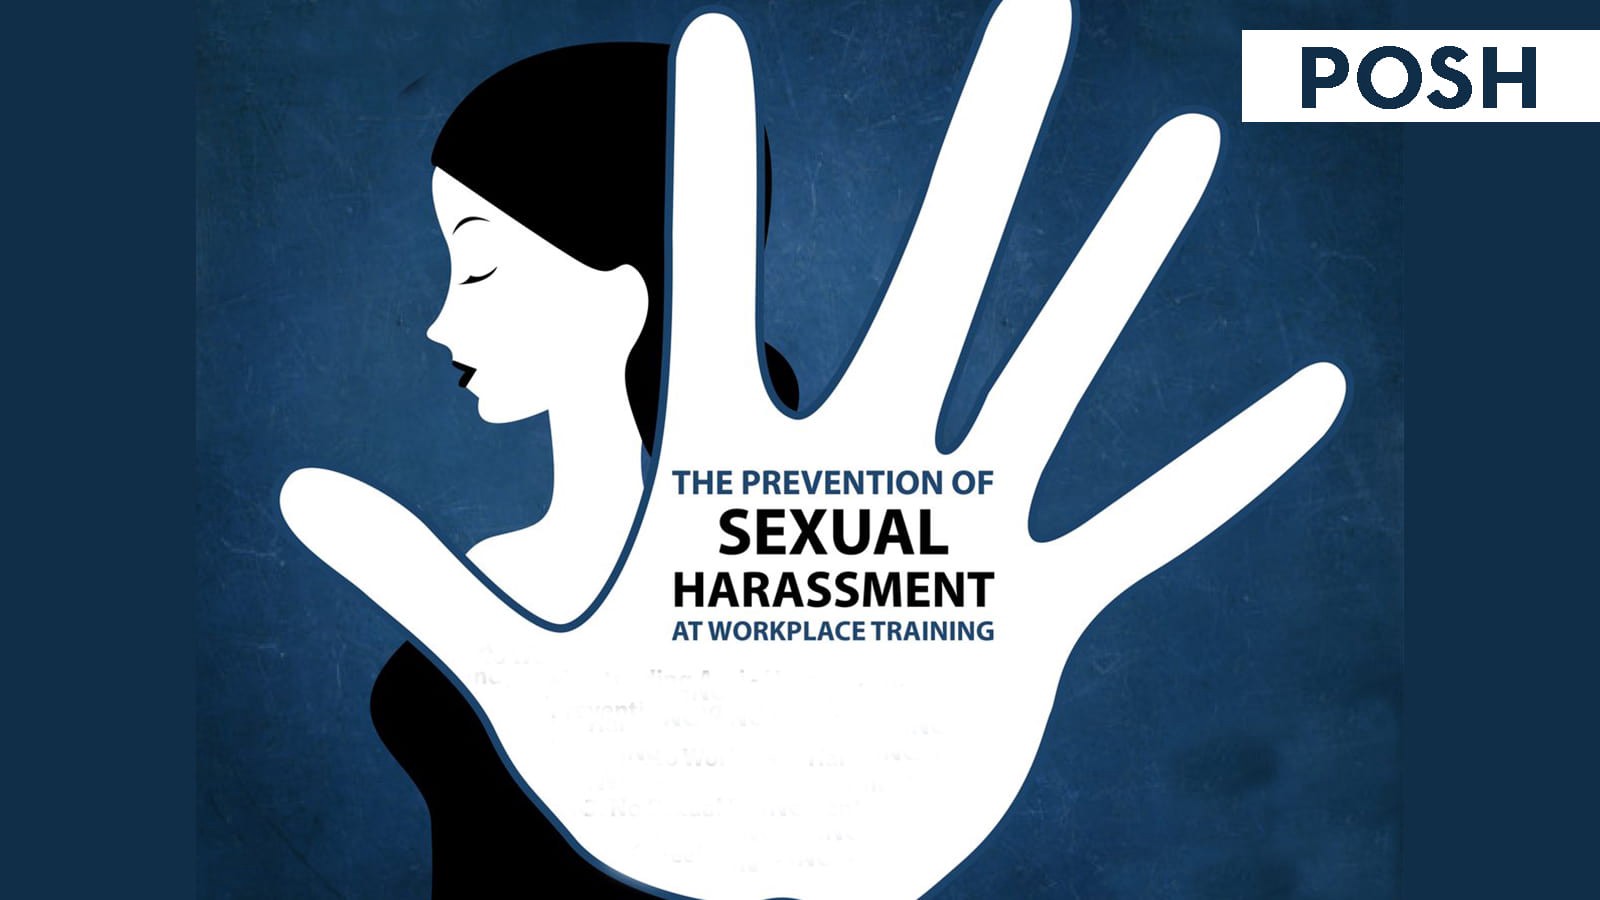 The Sexual Harassment Of Women At Workplace Prevention Prohibition And Redressal Act 2013 